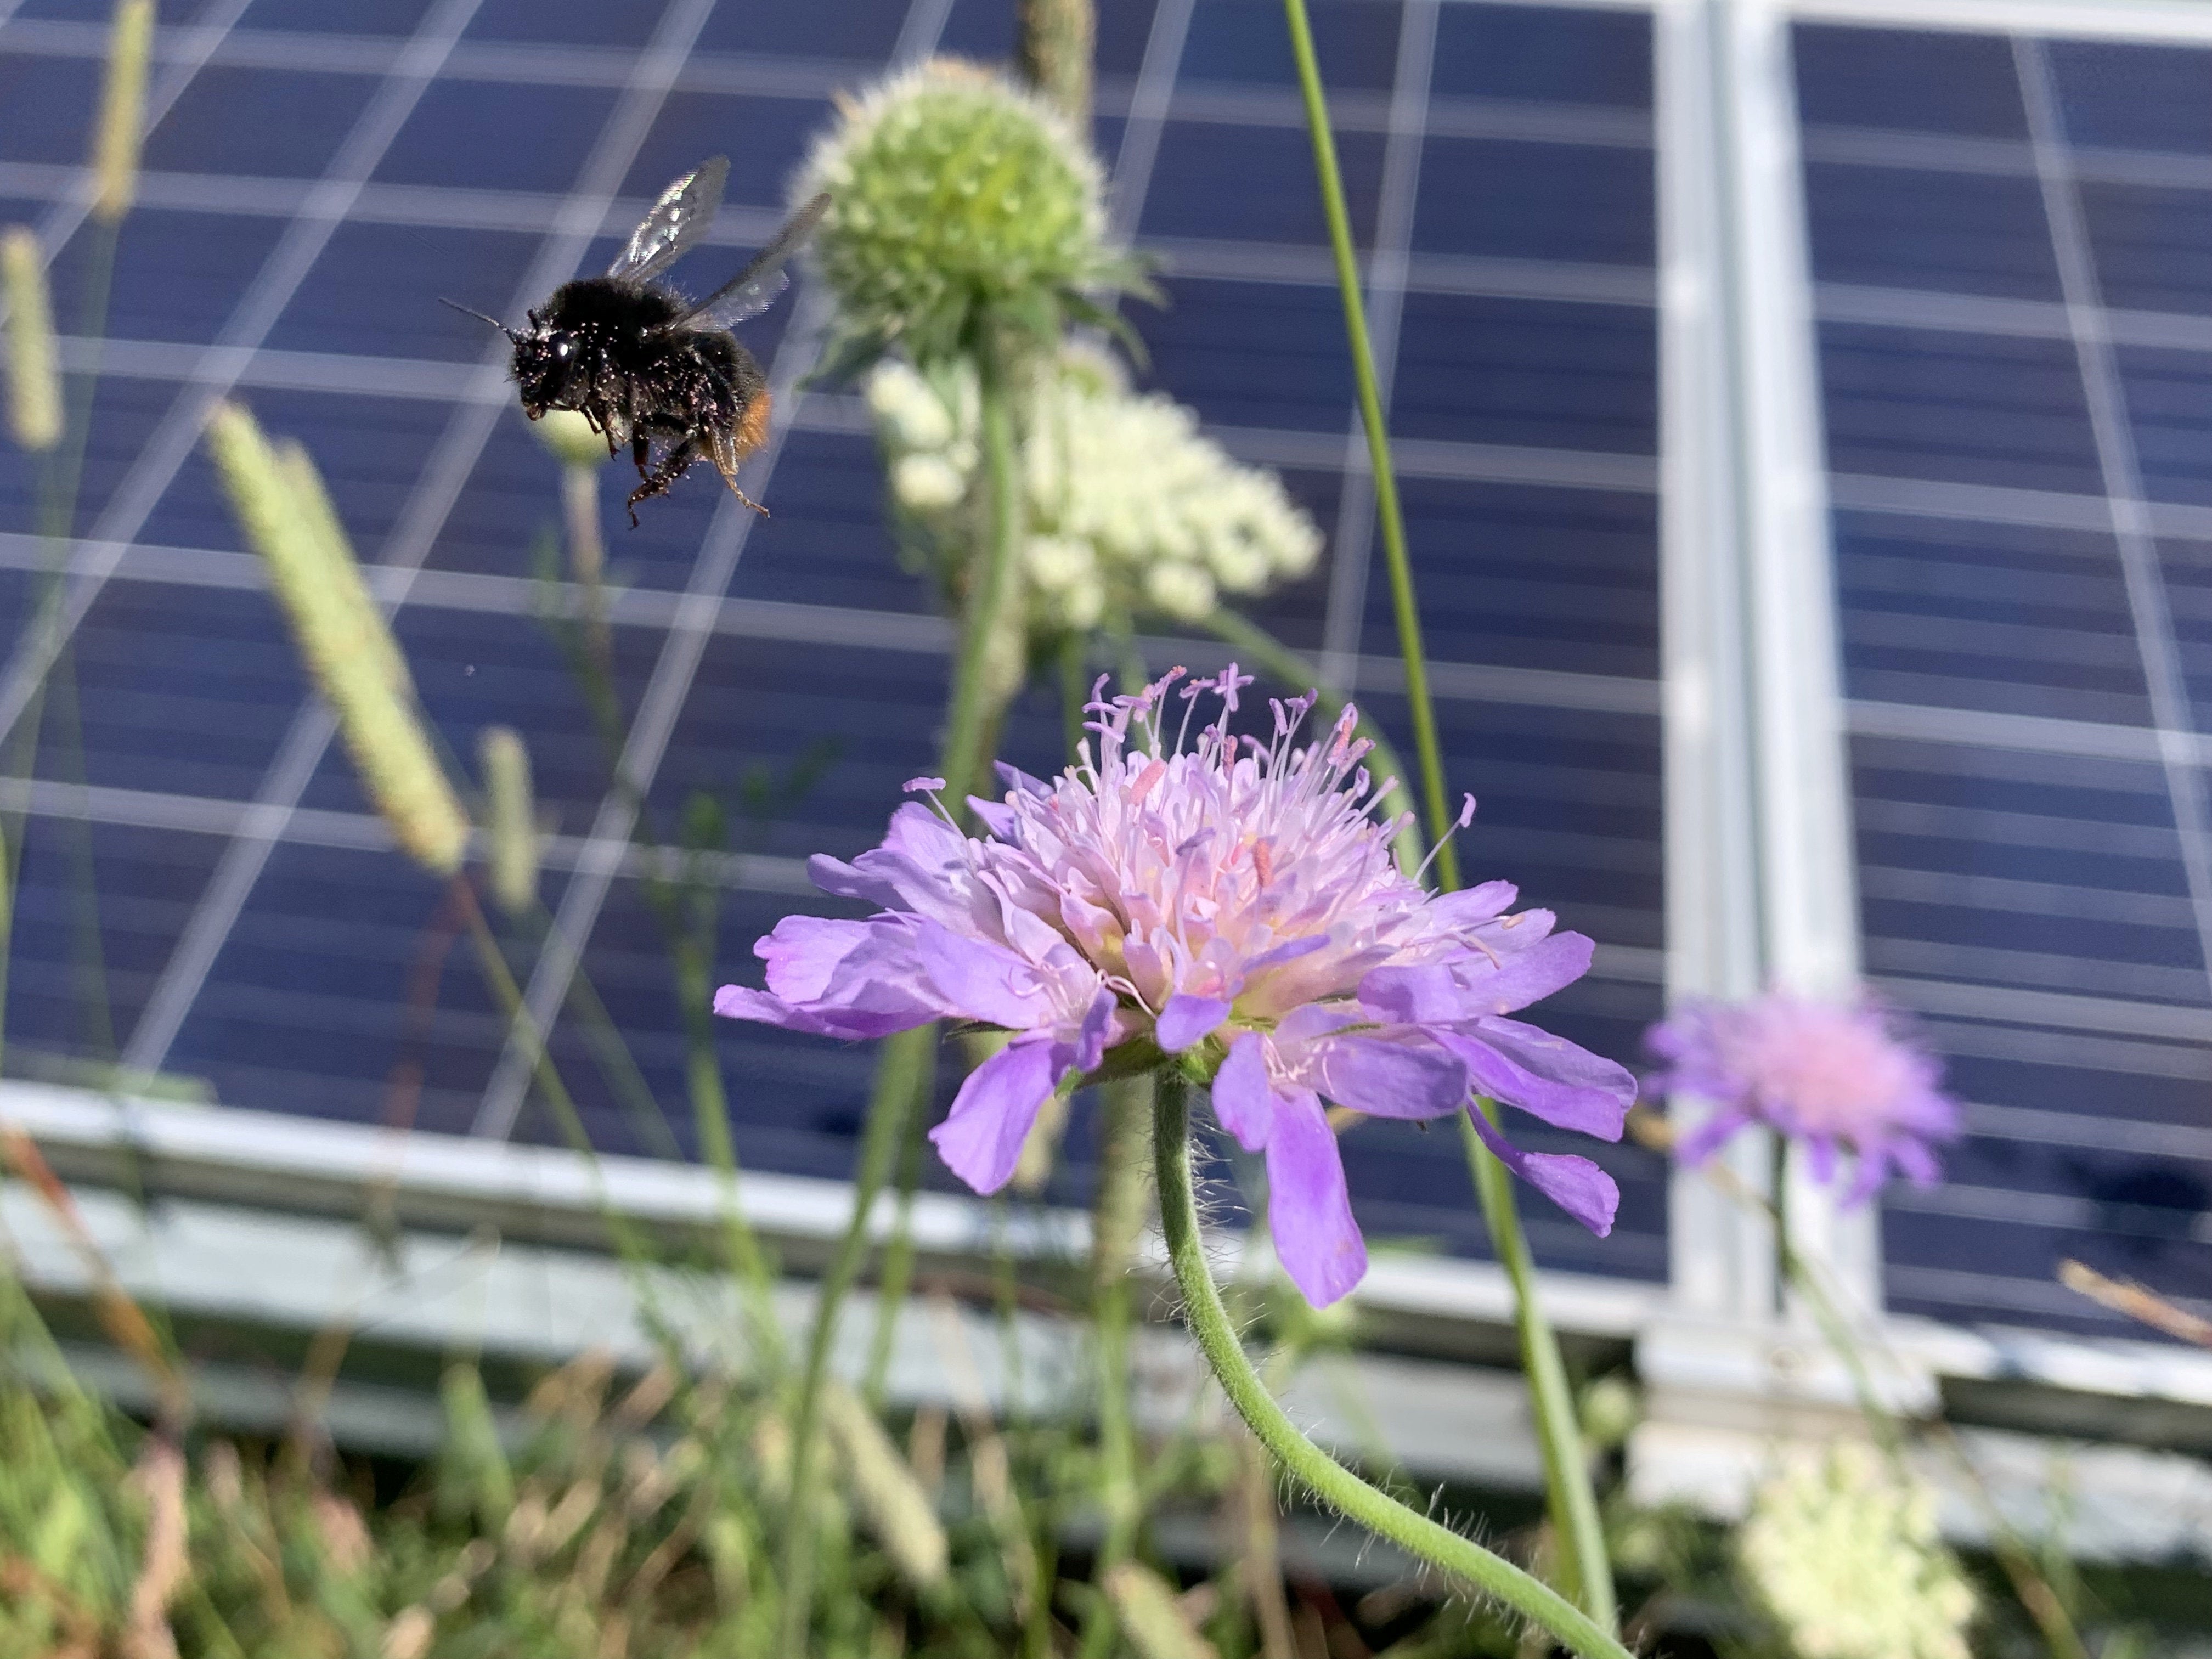 A bumble bee in a UK solar park